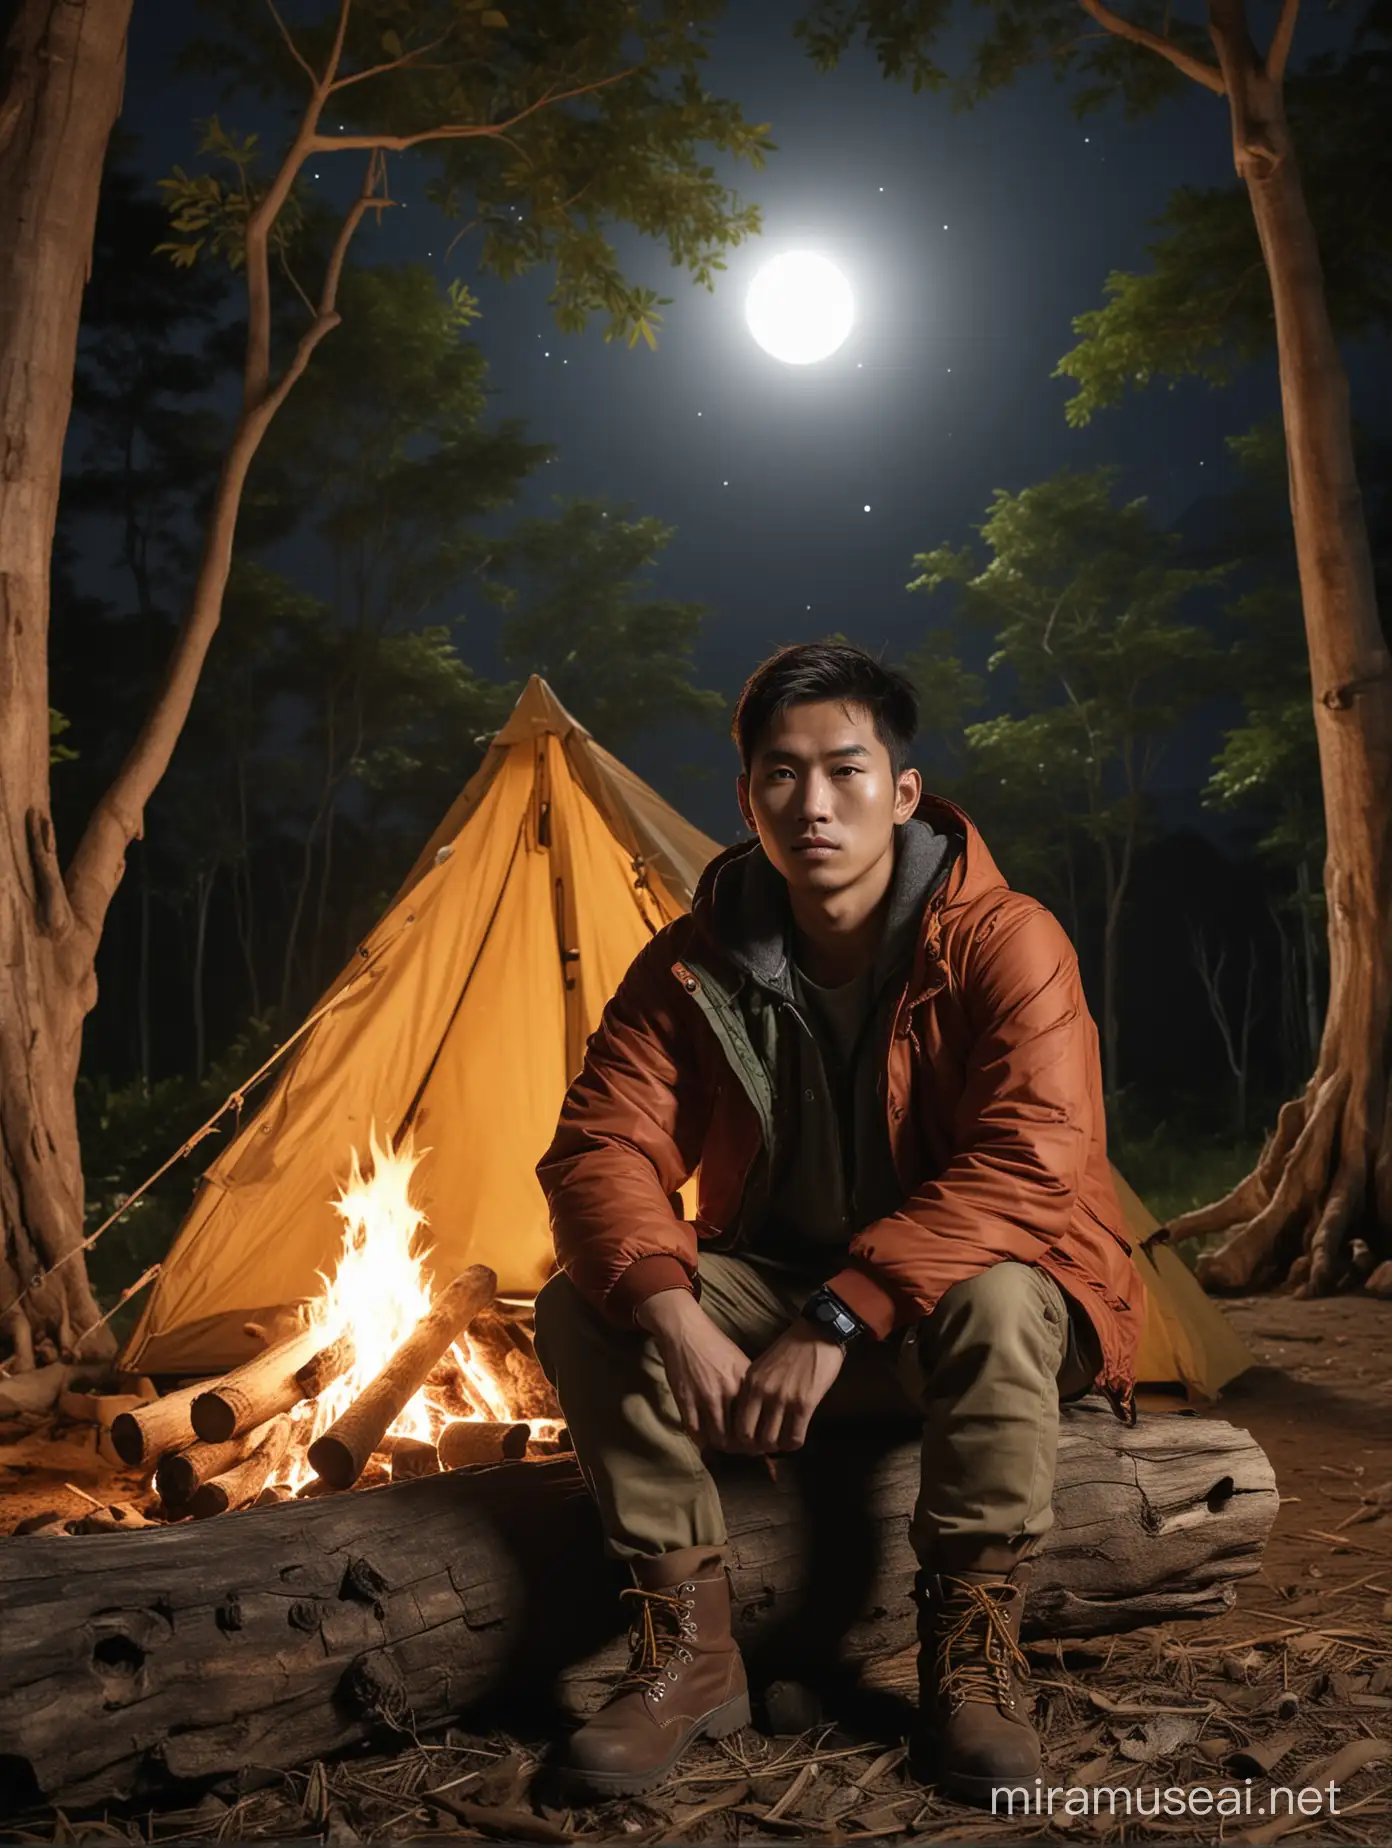 Nighttime Camping Asian Man by Bonfire in Tropical Forest